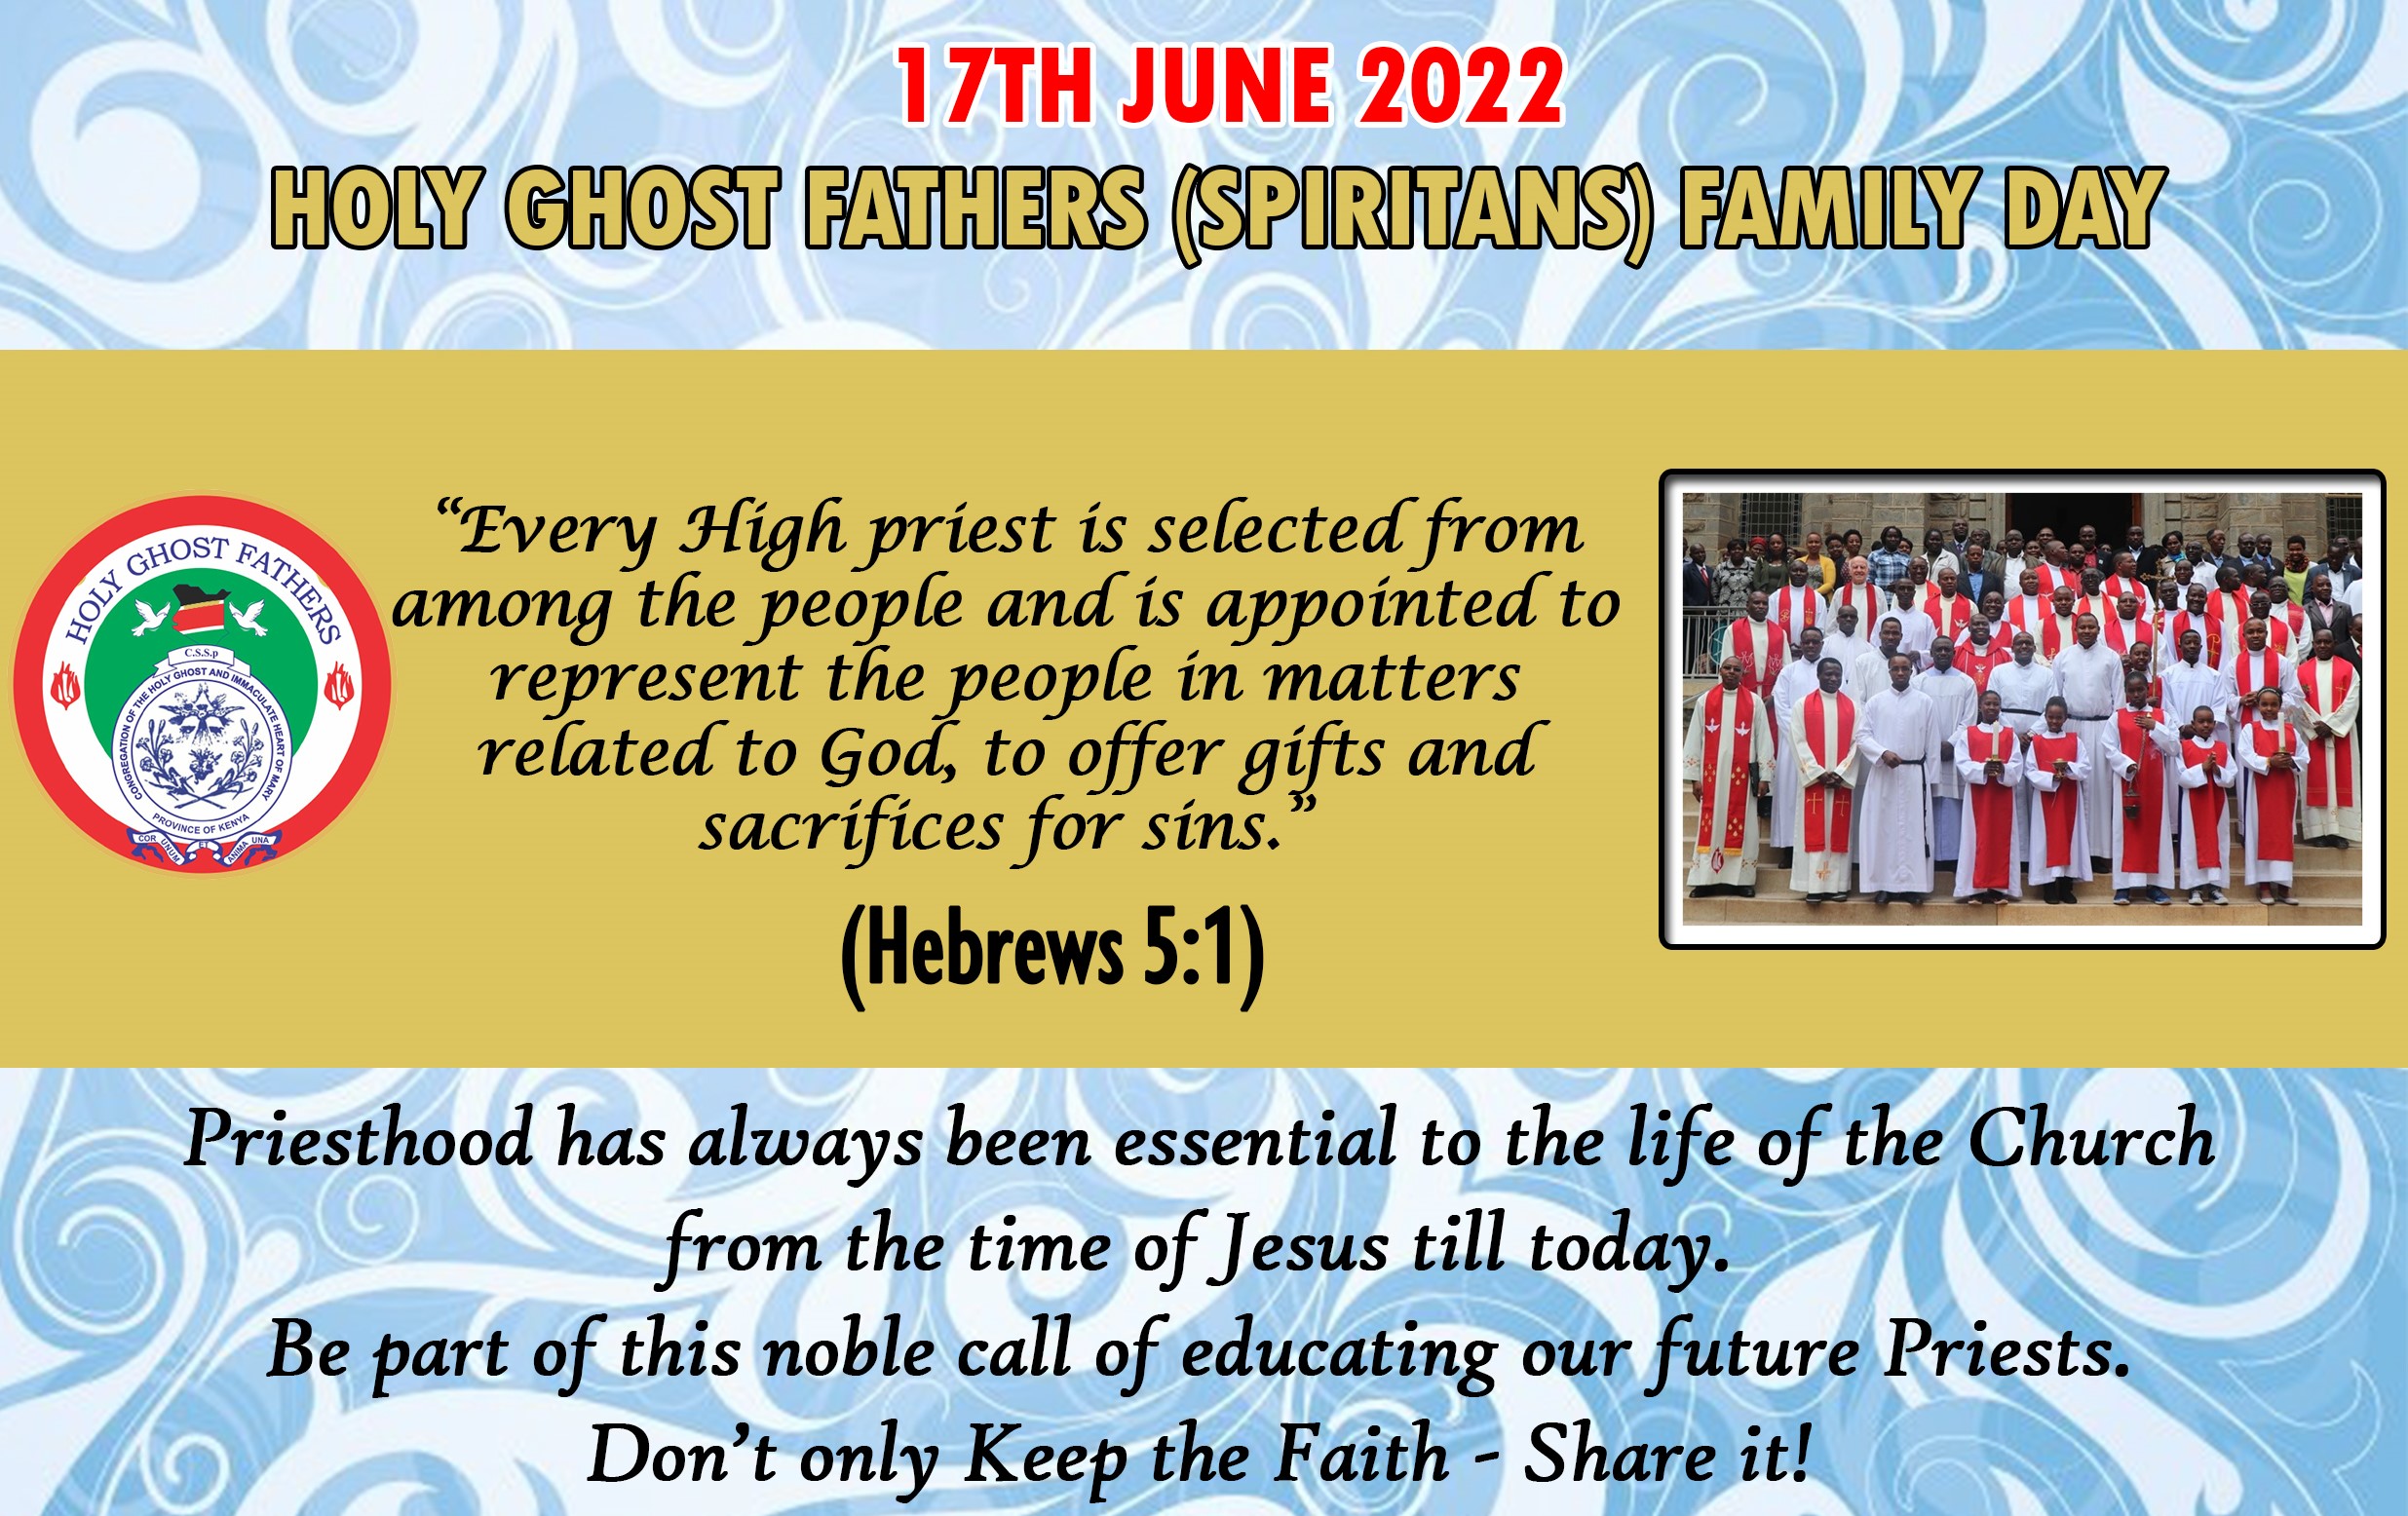 HOLY GHOST FATHERS FAMILY DAY 2022